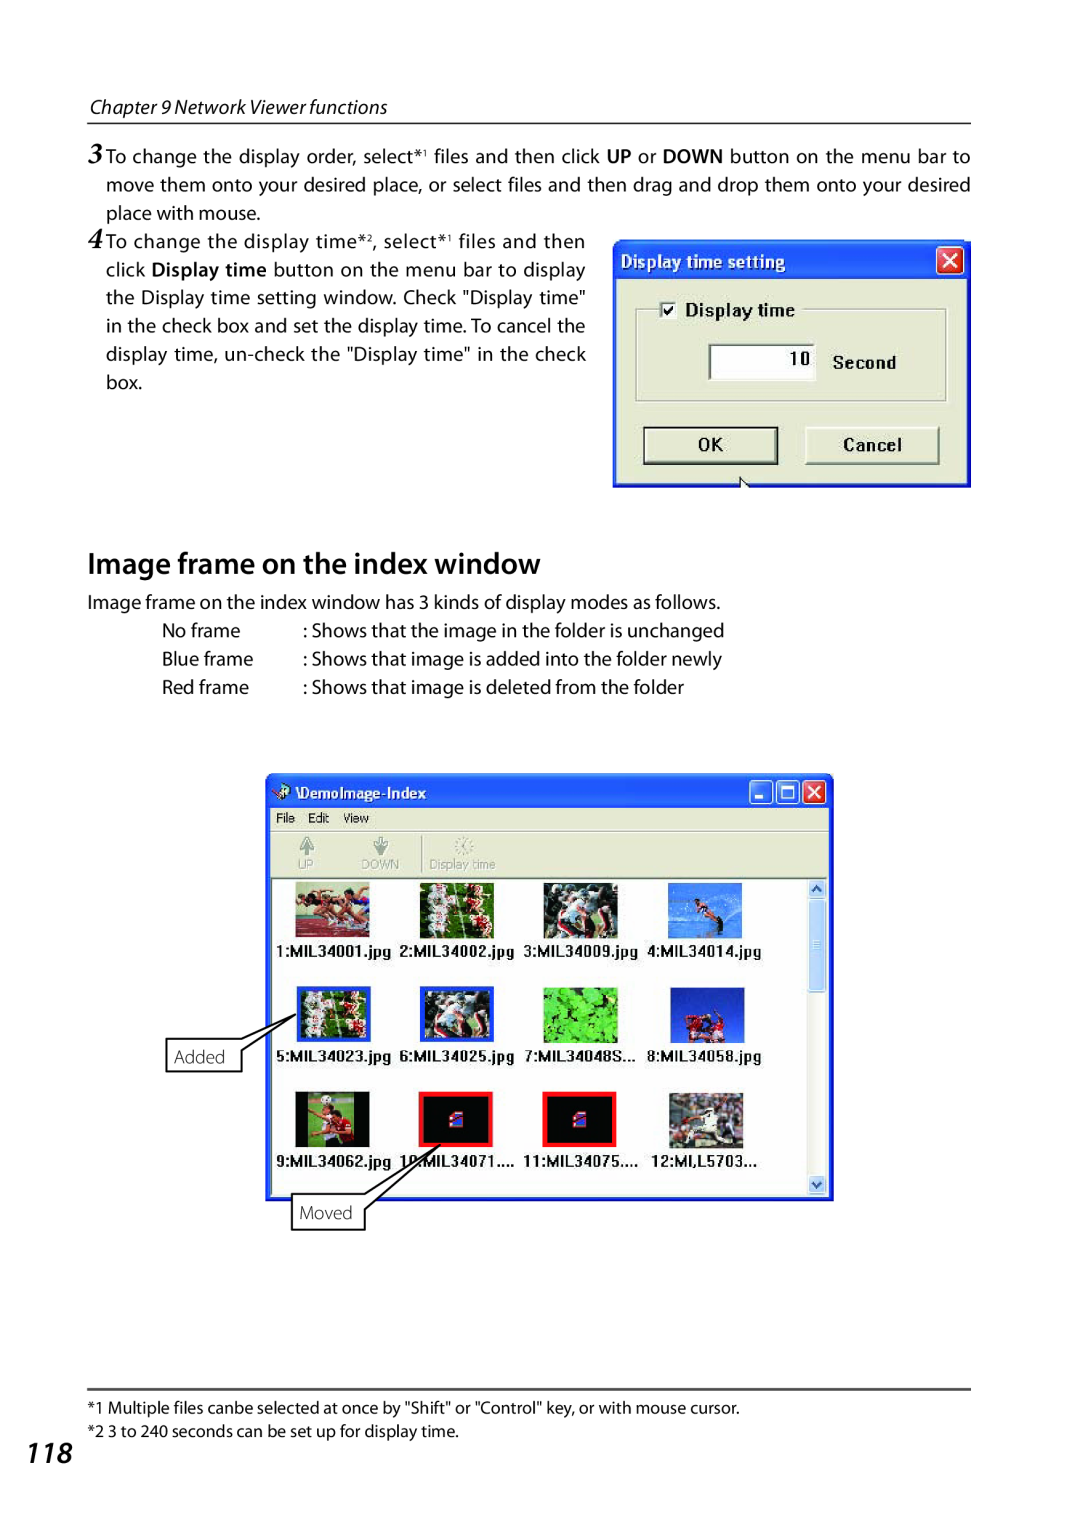 Sanyo SO-WIN-KF3AC, QXXAVC922---P owner manual Image frame on the index window, Network Viewer functions 